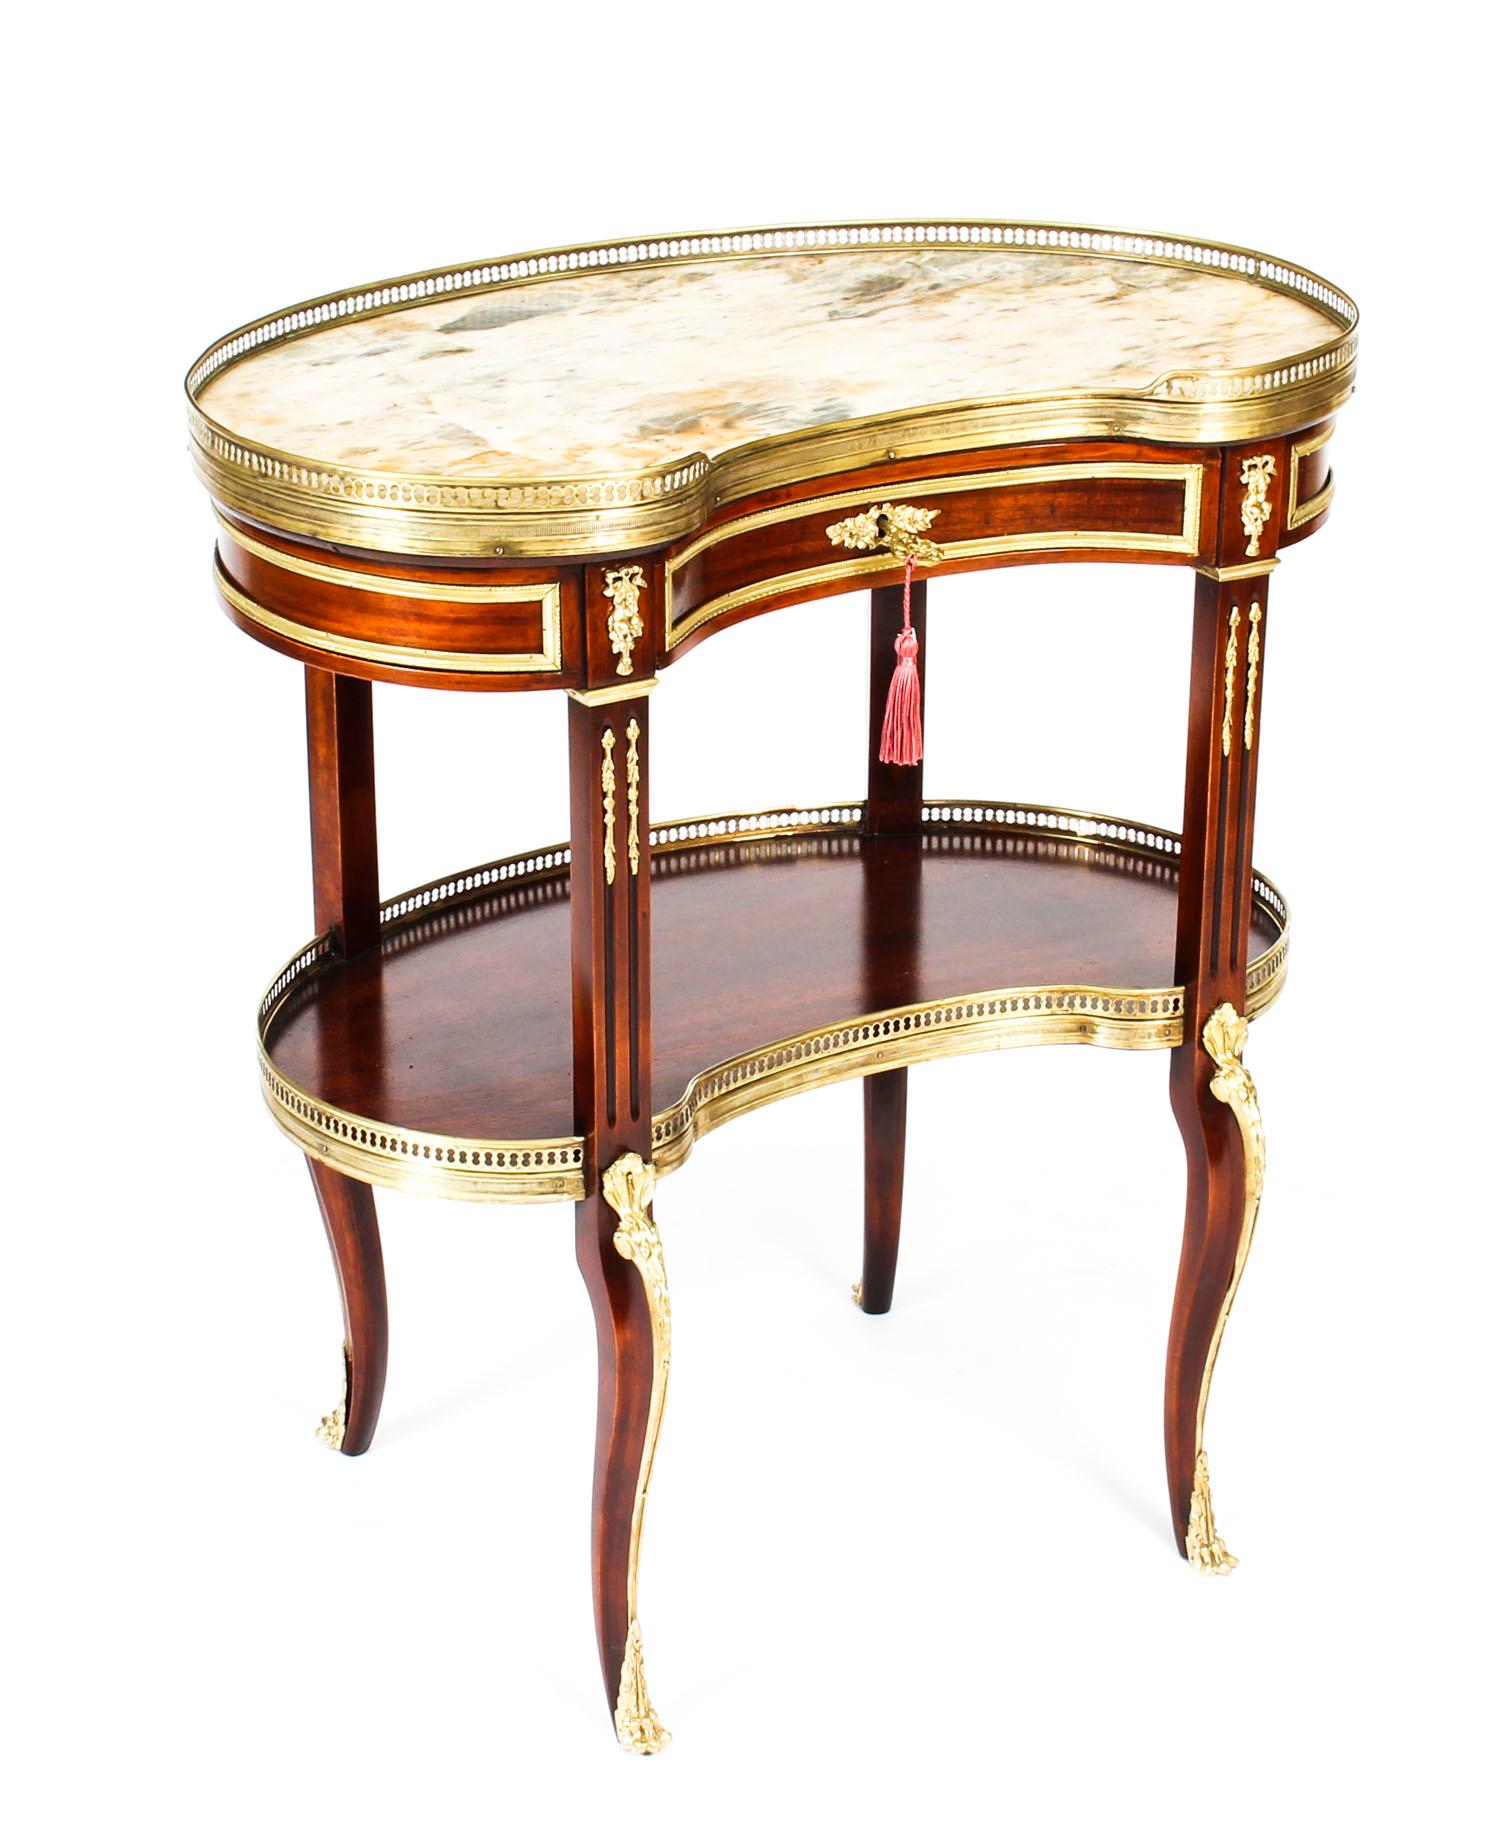 French Louis XVI Revival Kidney Shaped Marble-Top Side Table, 19th Century 10